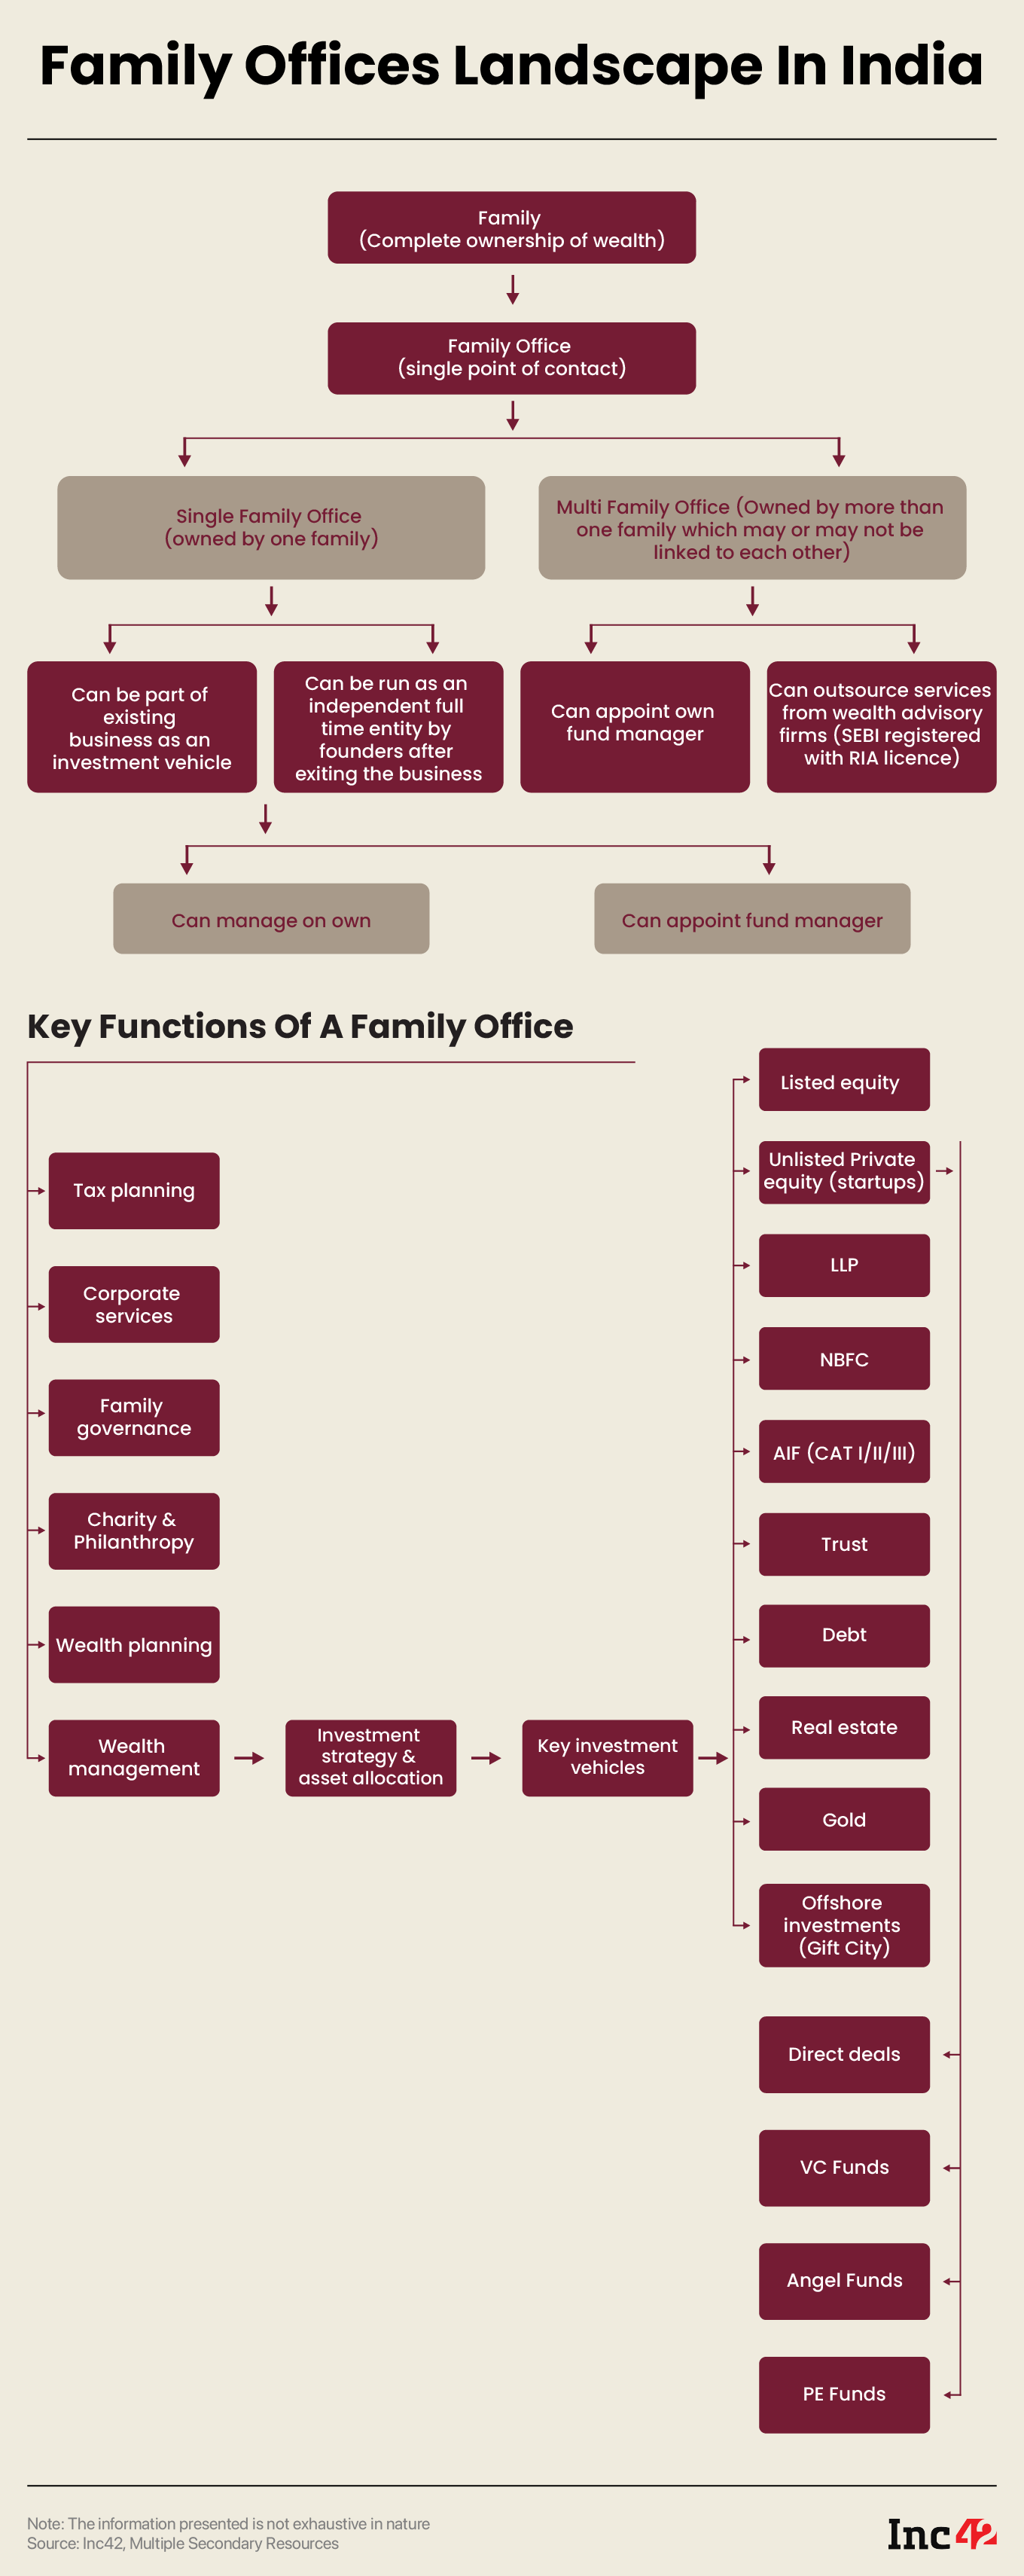 Decoding Family Offices Landscape In India